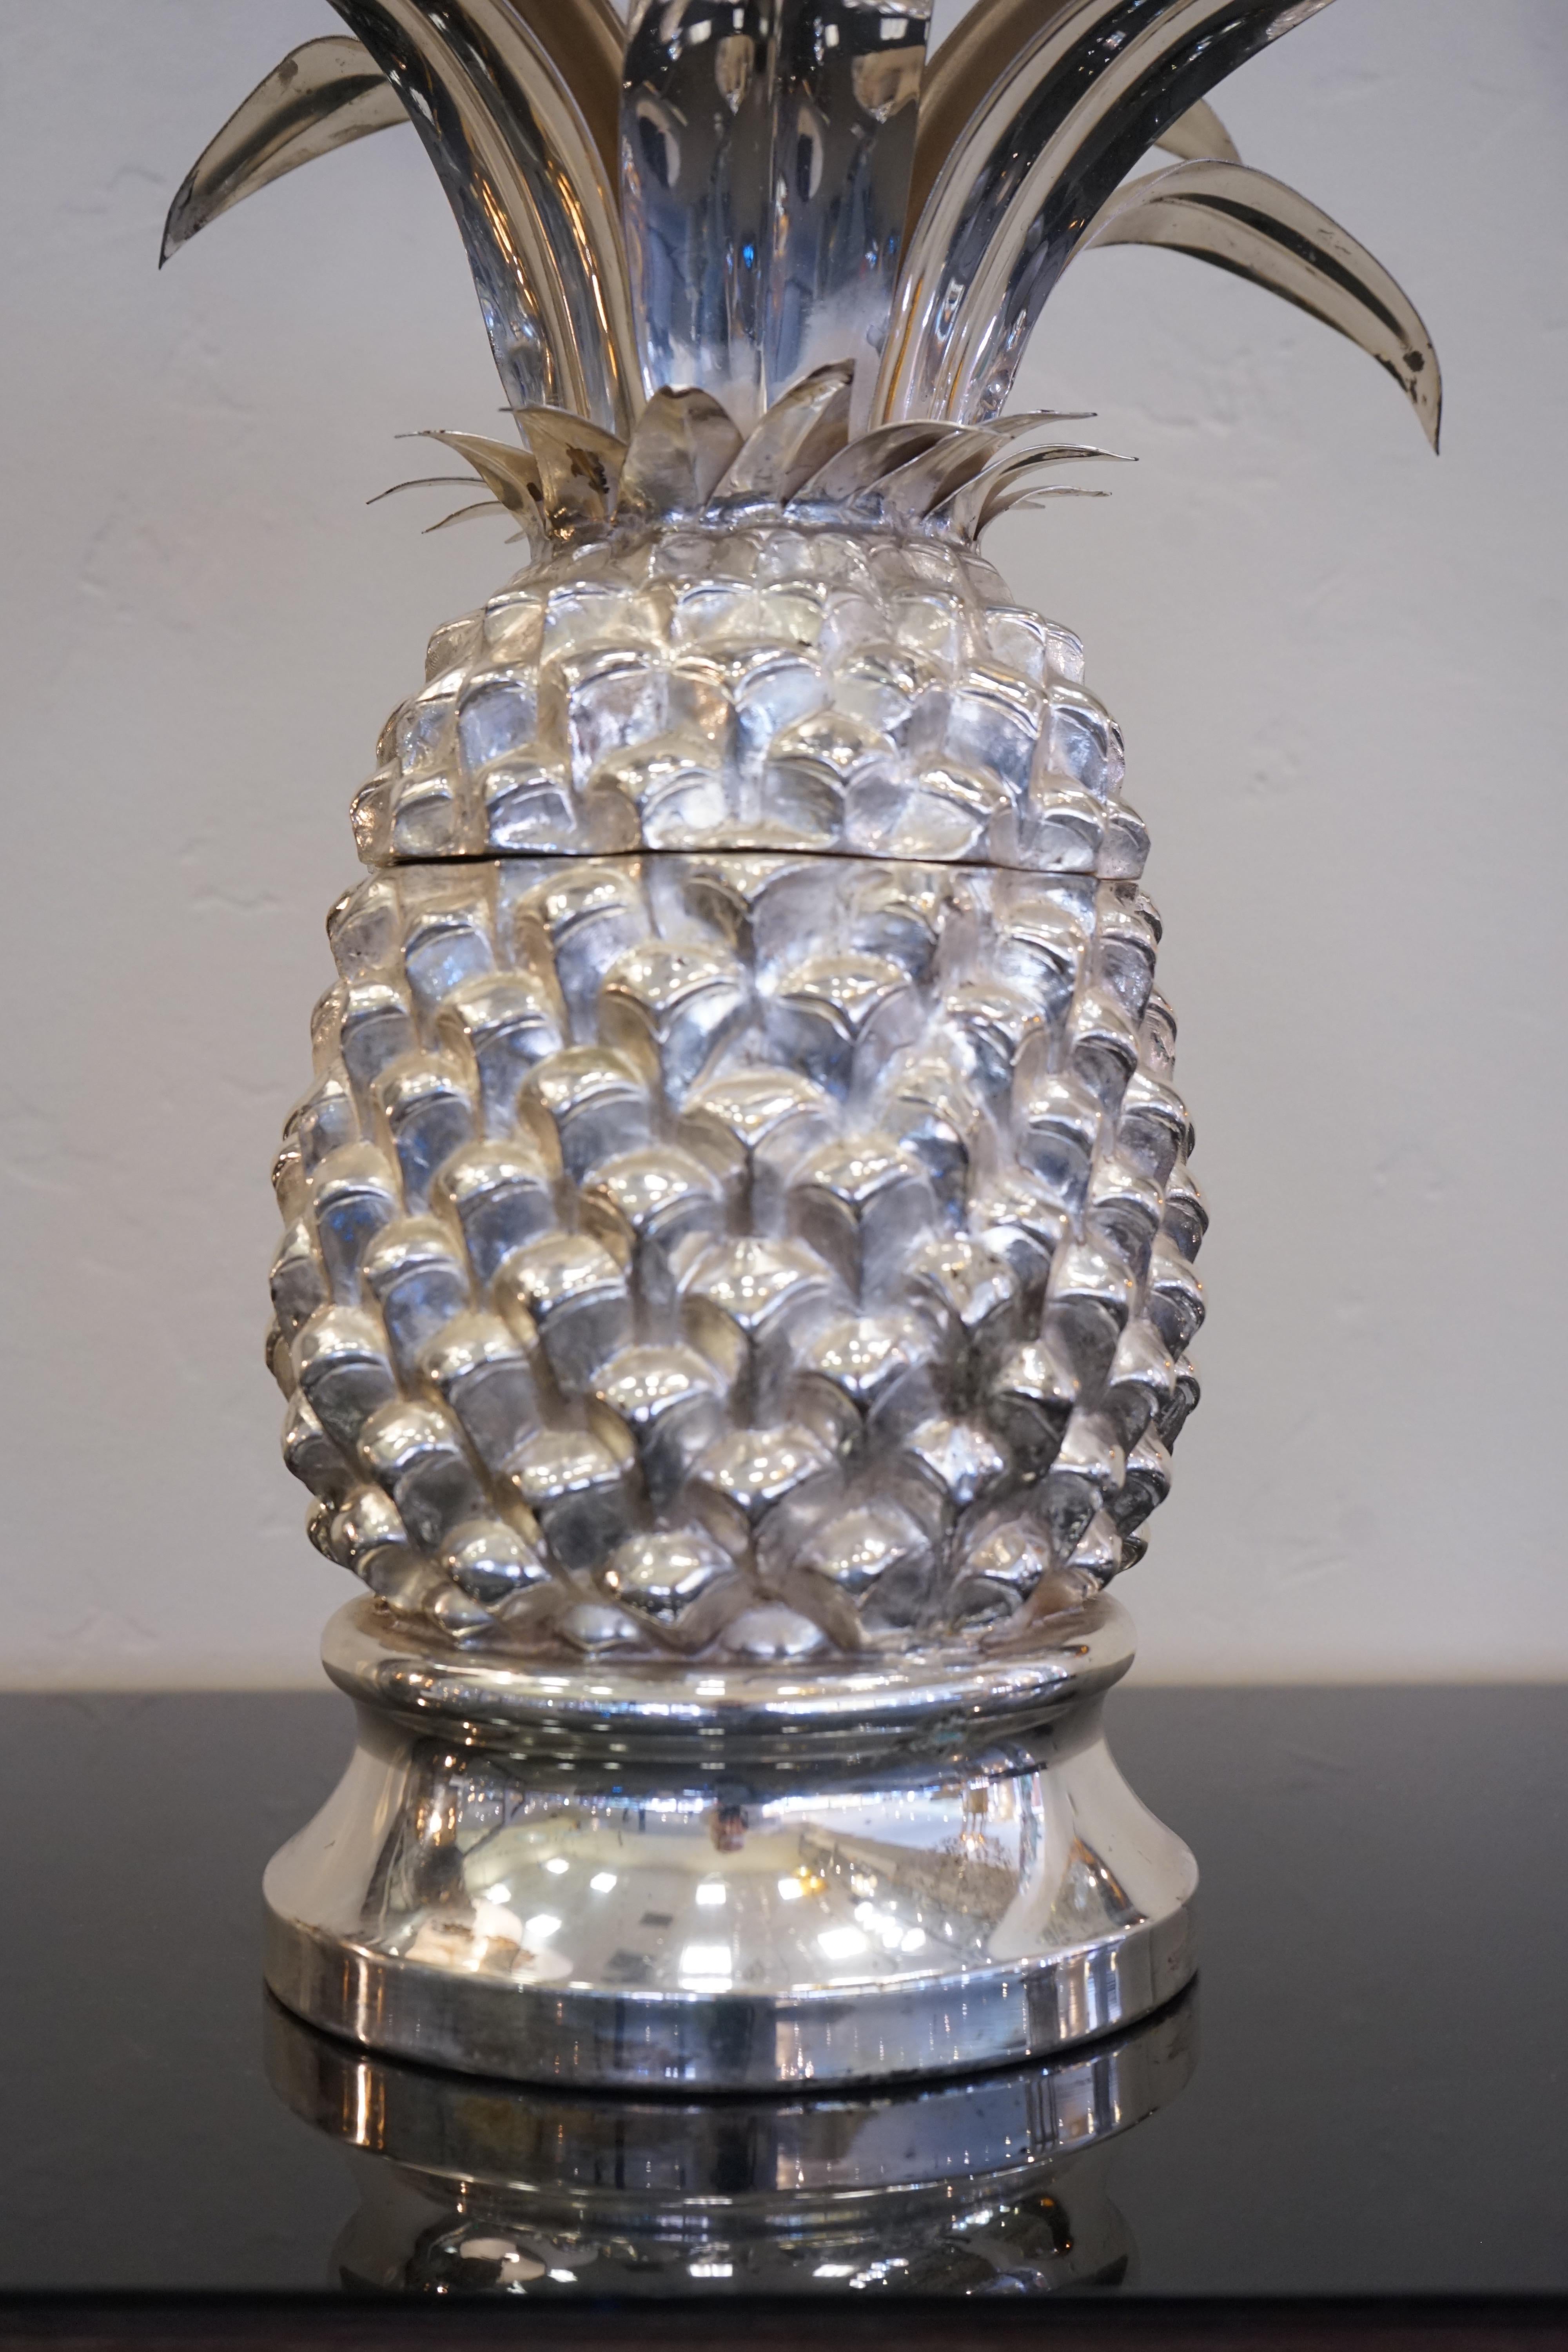 1980s Italian chrome large scale pineapple shaped ice bucket. The top of the pineapple opens to reveal an ice bucket but is also a stand-alone art piece when closed.